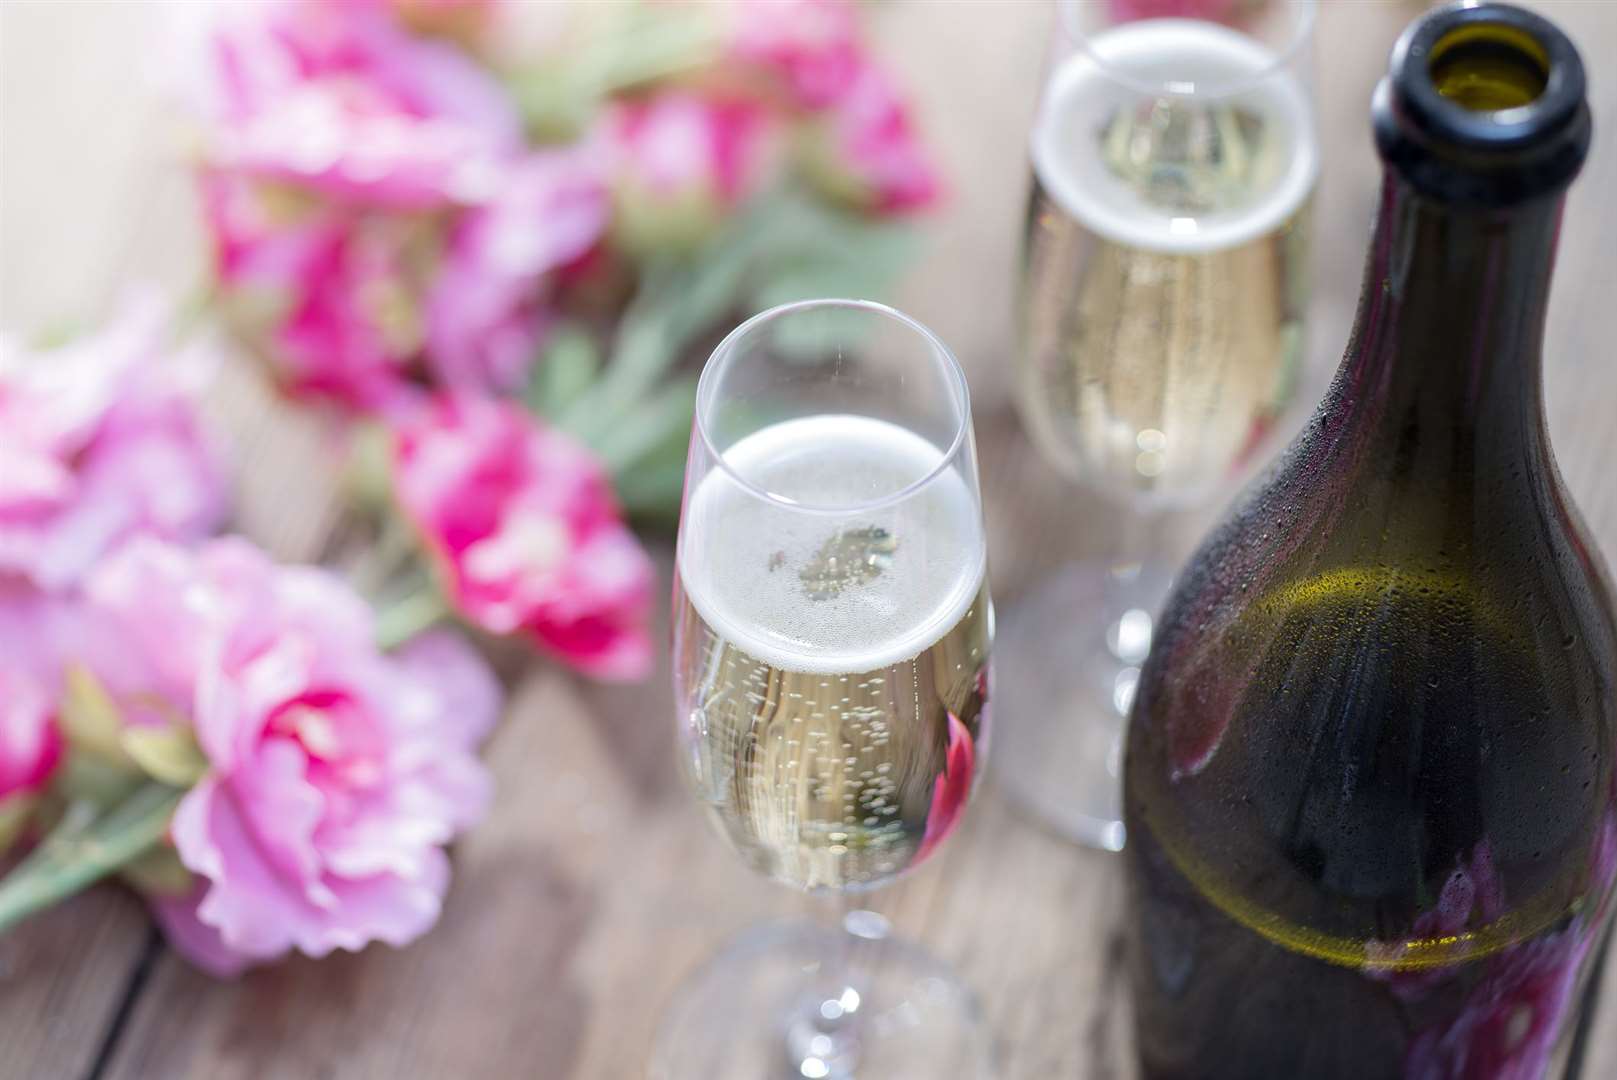 The winner could be popping corks in celebration. If only they knew....Photo: Getty Images/iStockphoto, MarkSwallow